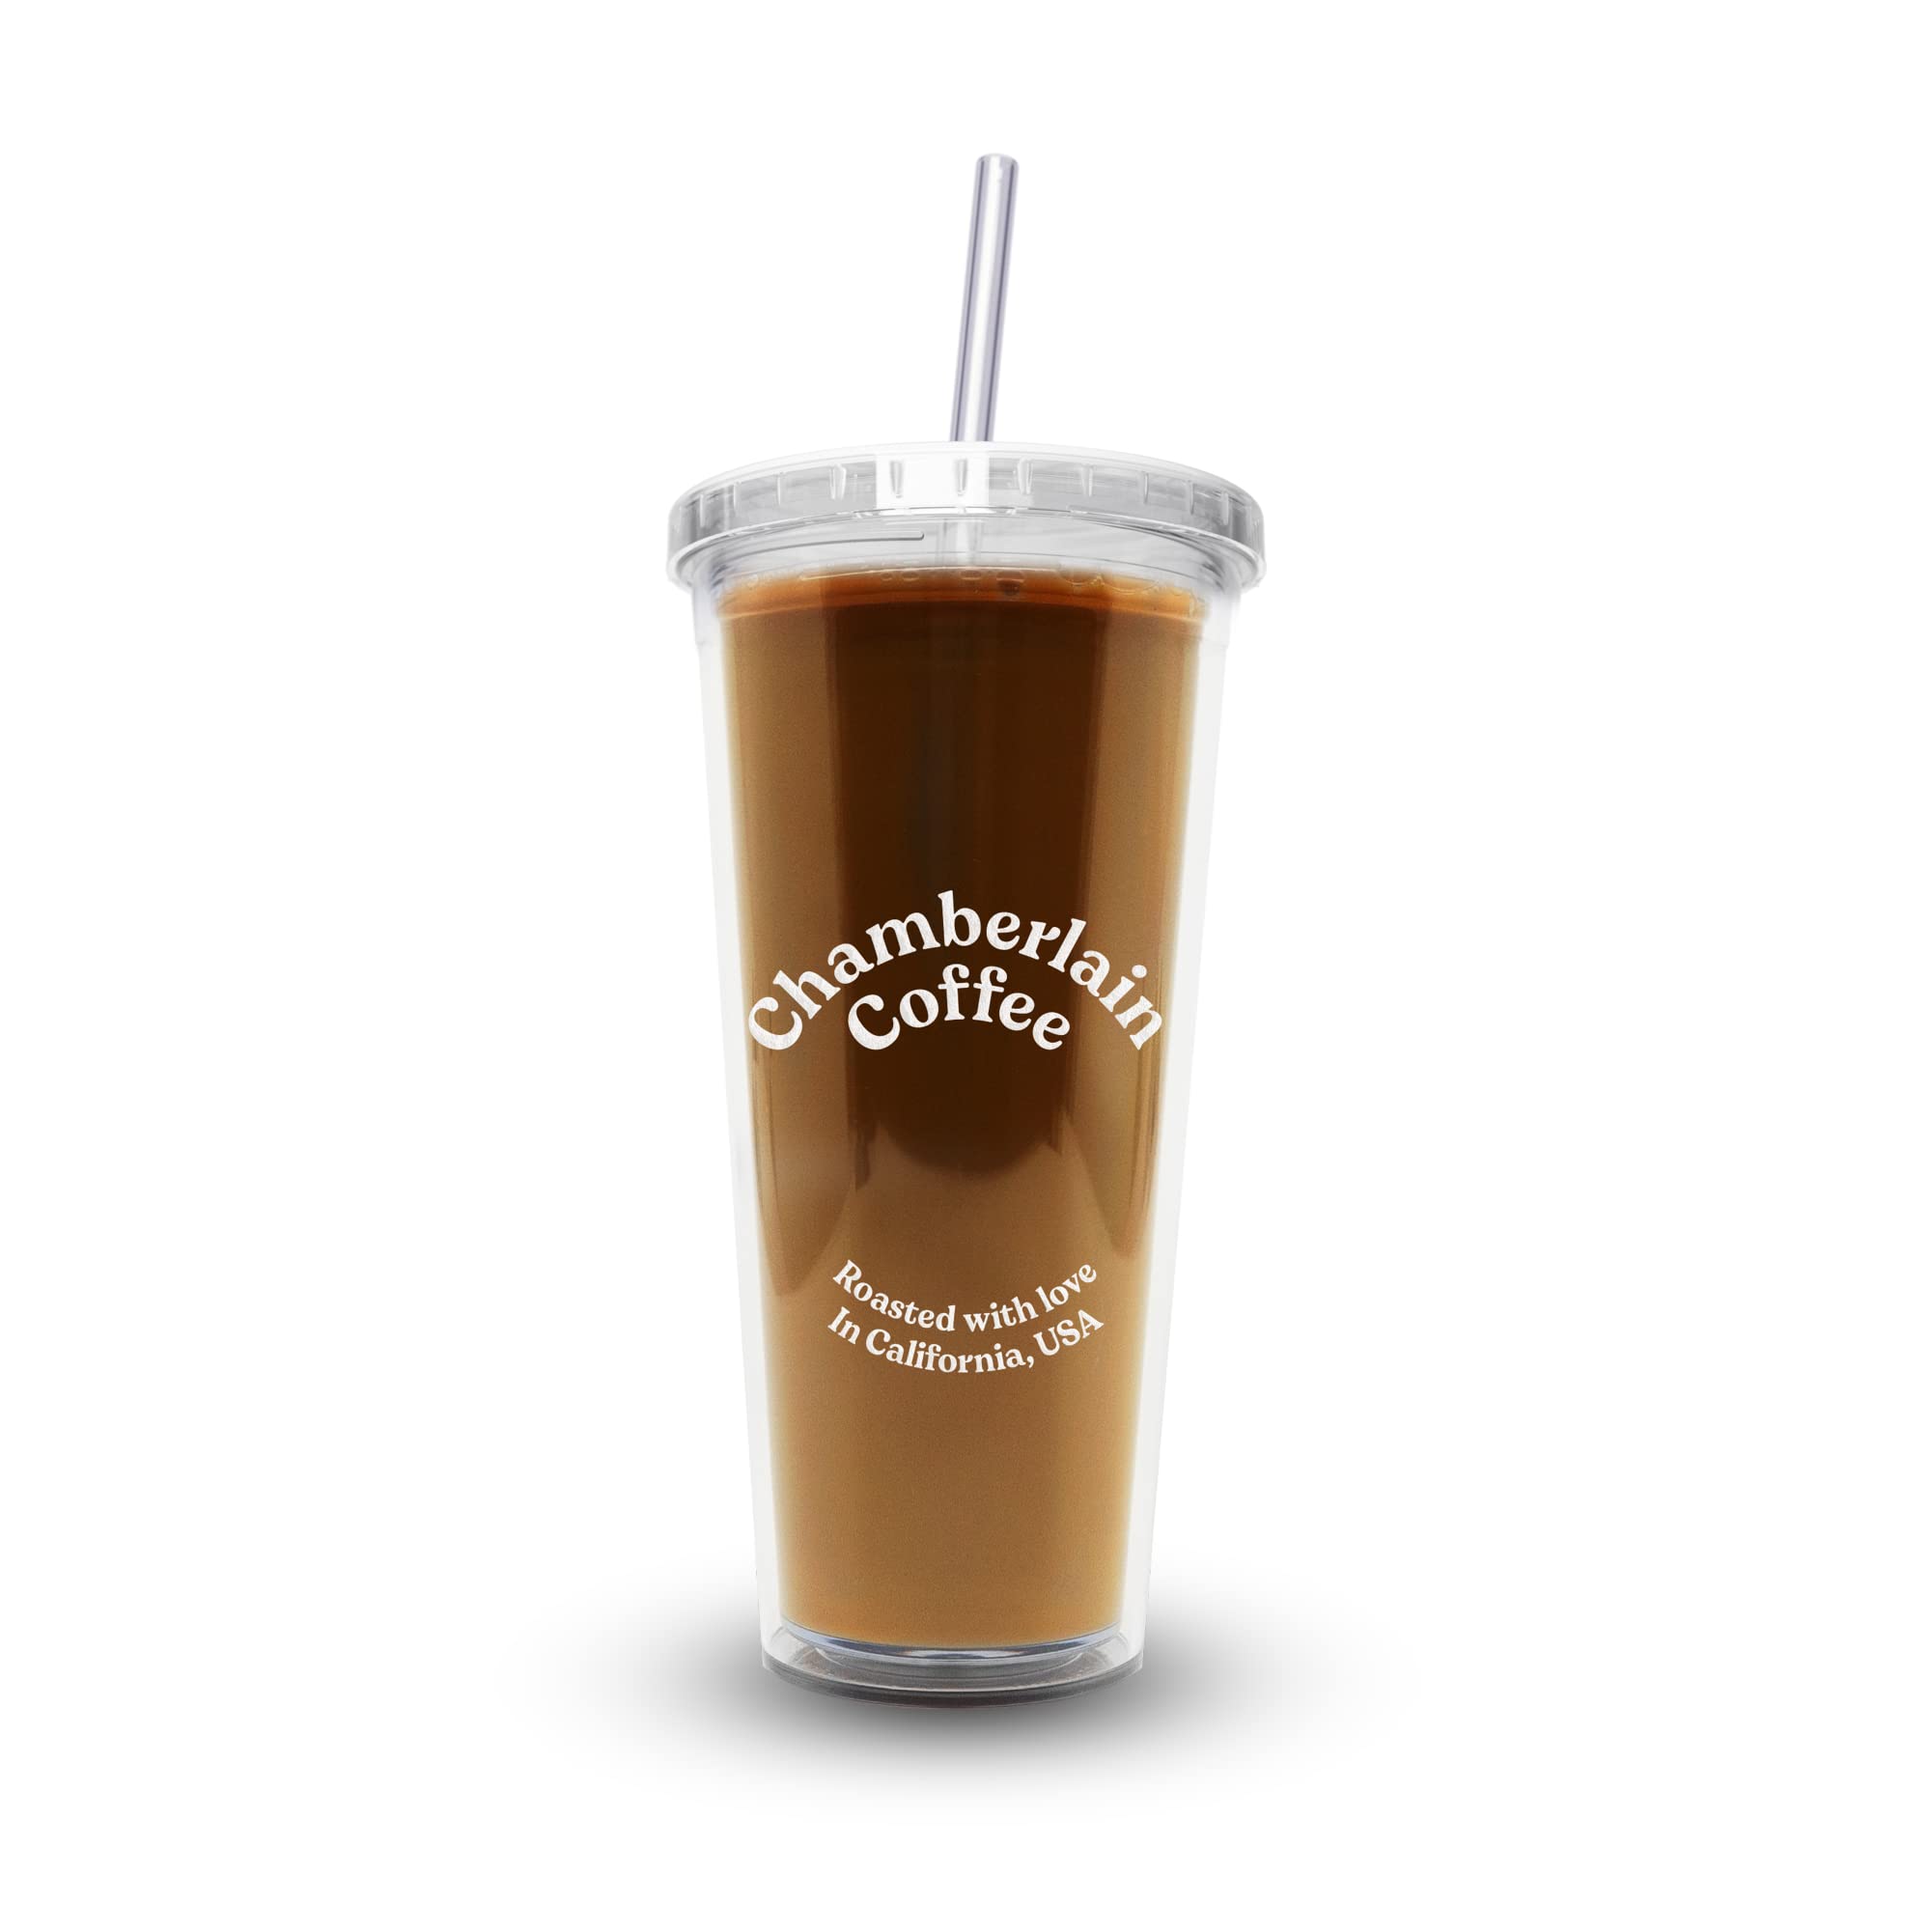 chamberlain coffee Transparent Double Wall Insulated Tumbler, Made from 100% Recyclable Plastic for cold Brew, 24oz size